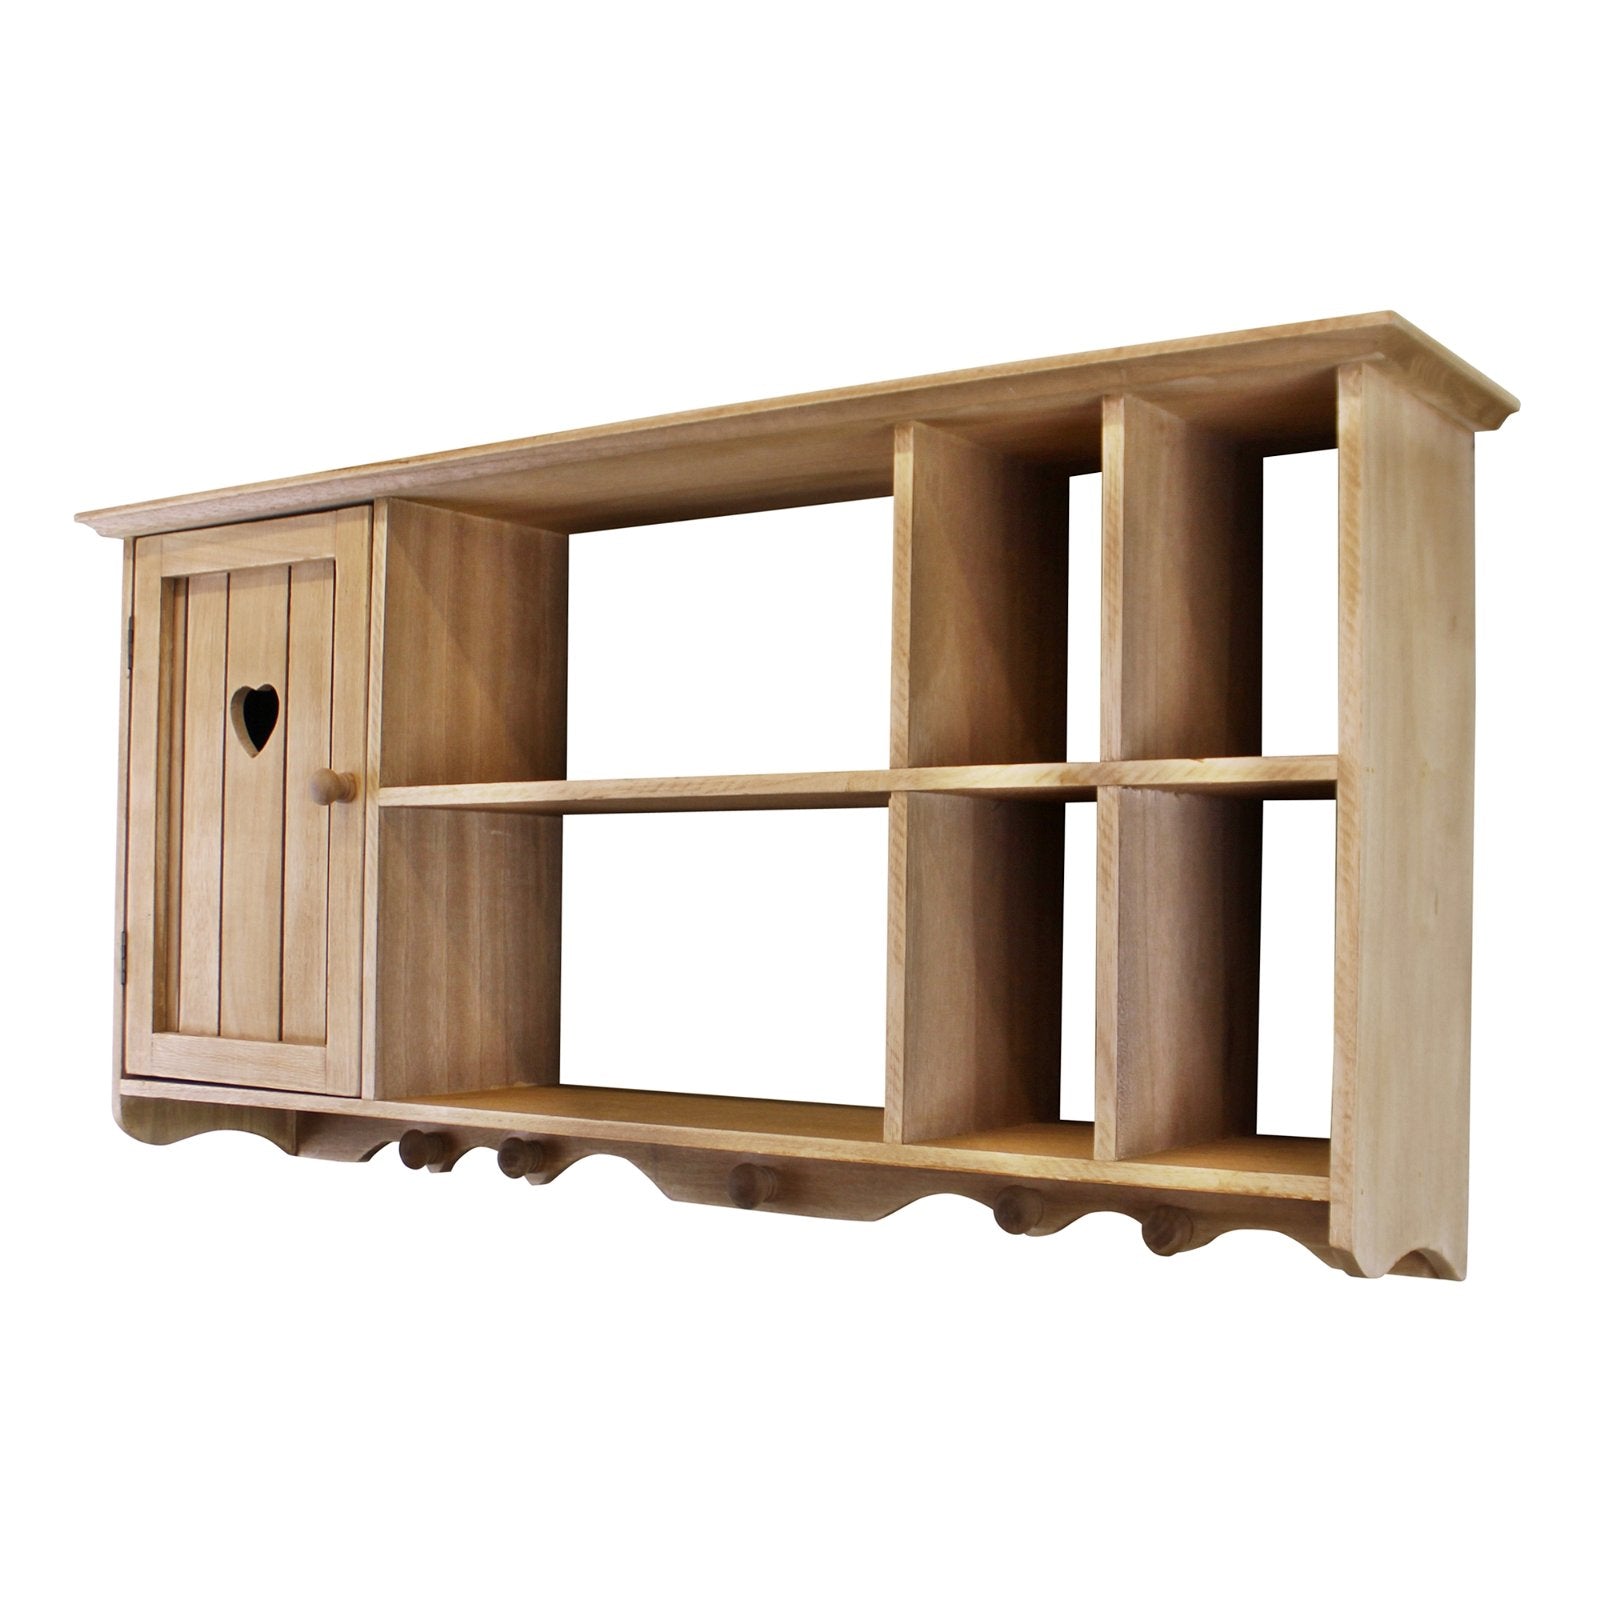 View Wooden Wall Hanging Unit With Cupboard Shelves information